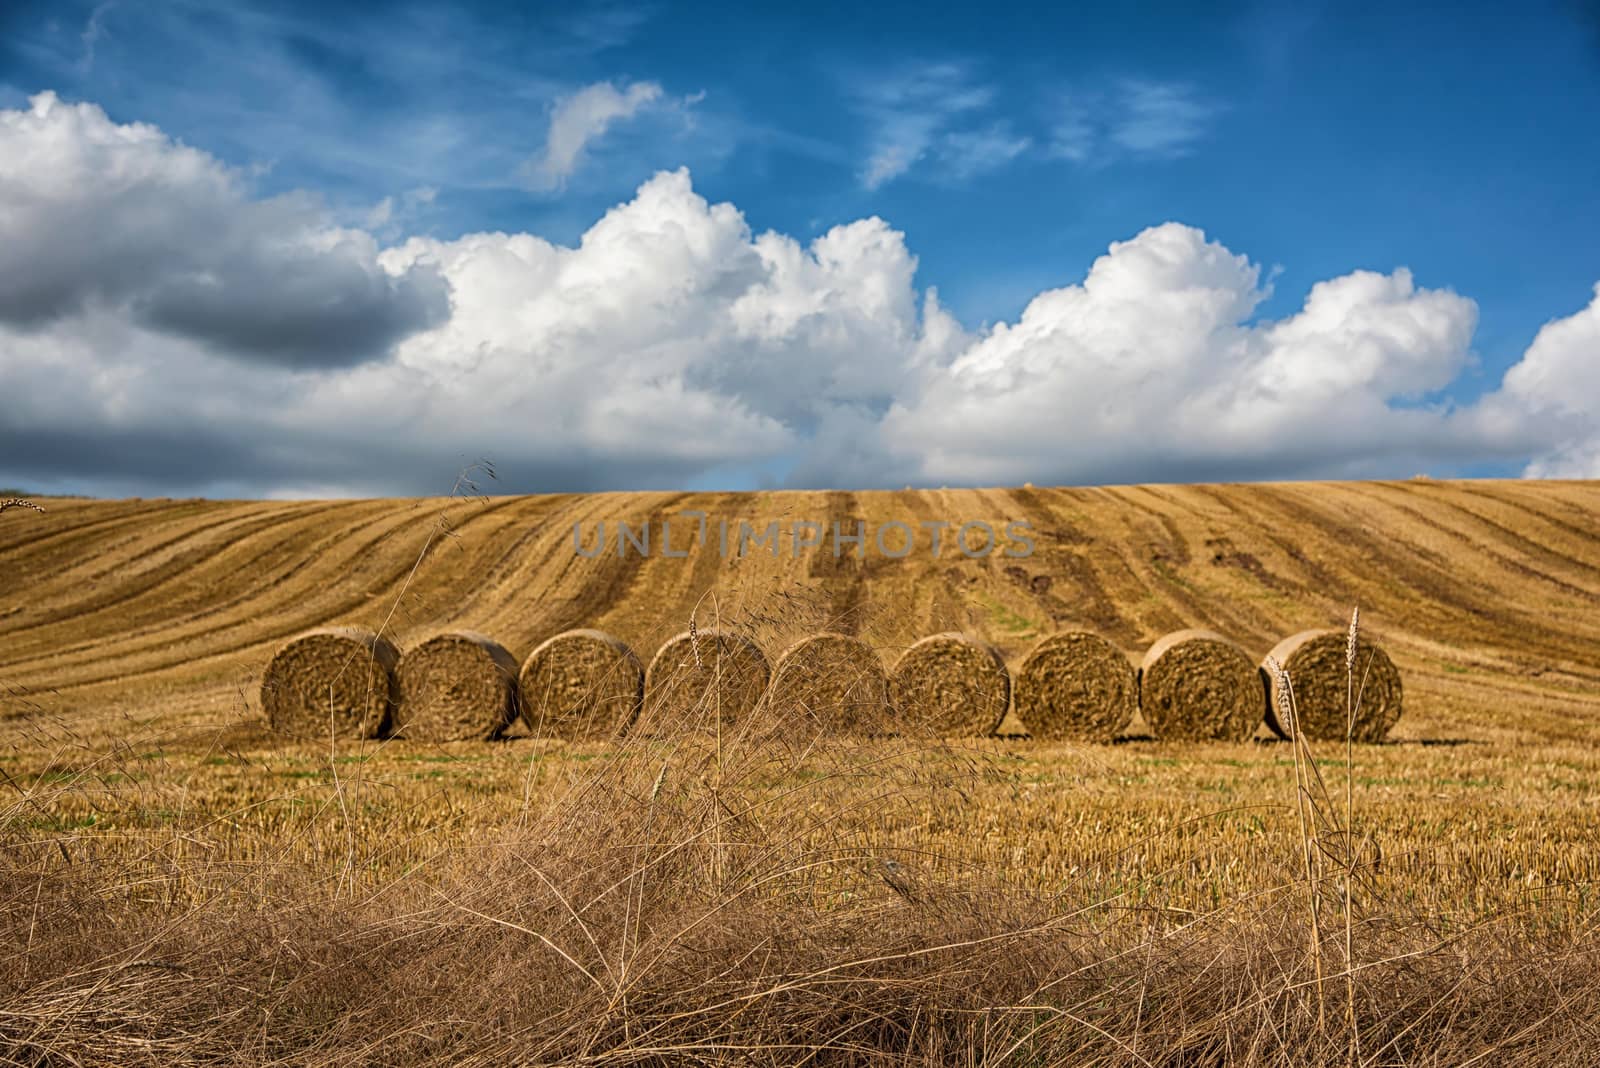 rolls of hay in field, Germany by rongreer